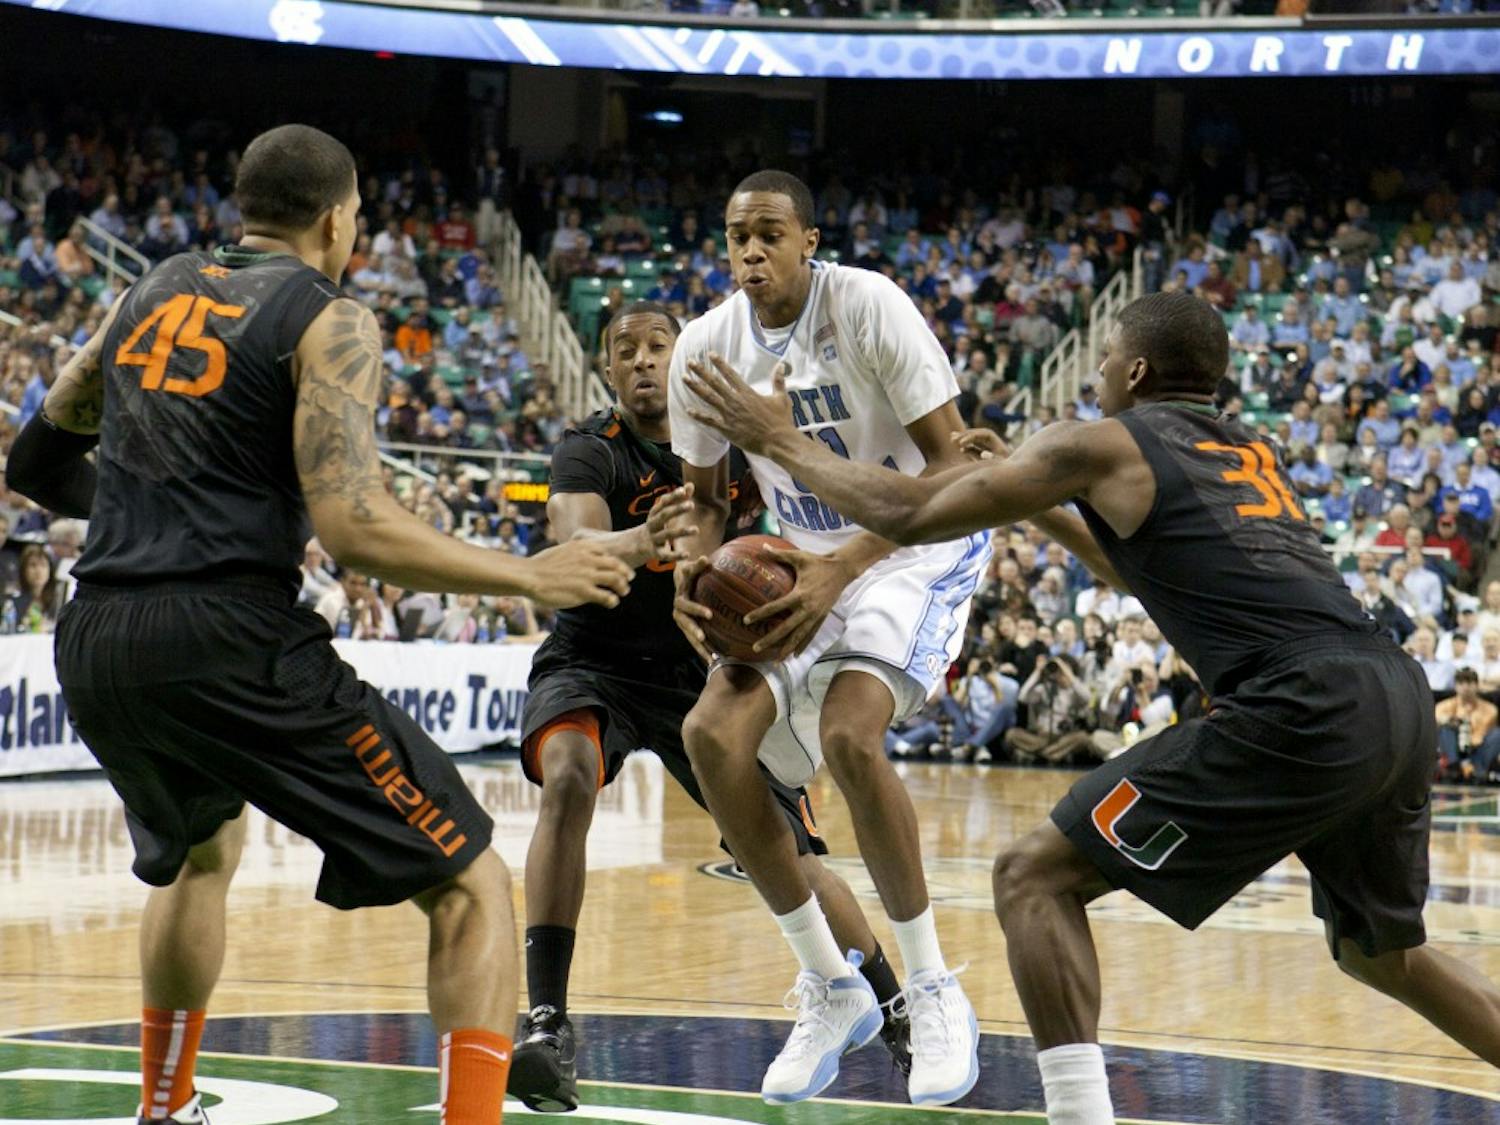 	The North Carolina Tar Heels defeated the Miami Hurricanes 61-59 in Quarterfinal game of the ACC Tournament in Greensboro, NC Friday, March 11.